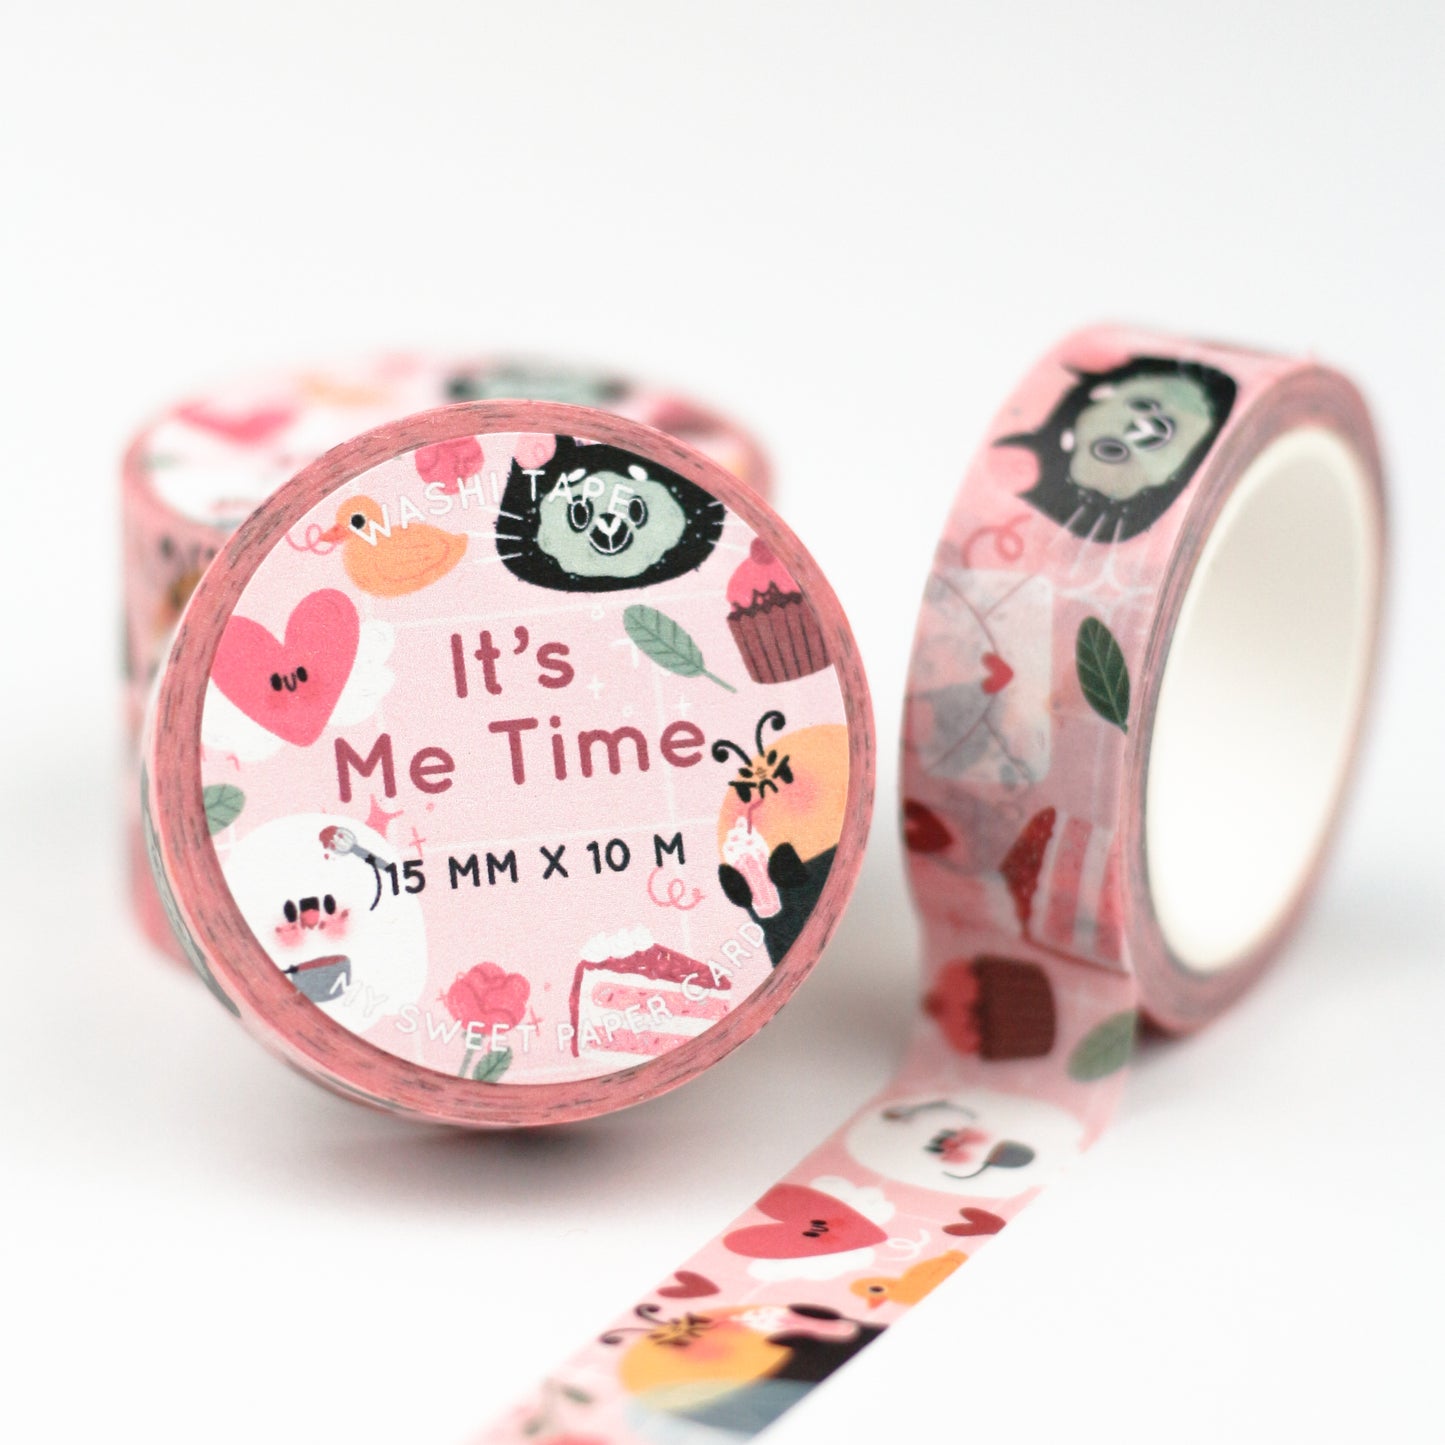 Me Time - Valentine's Day Washi Tape